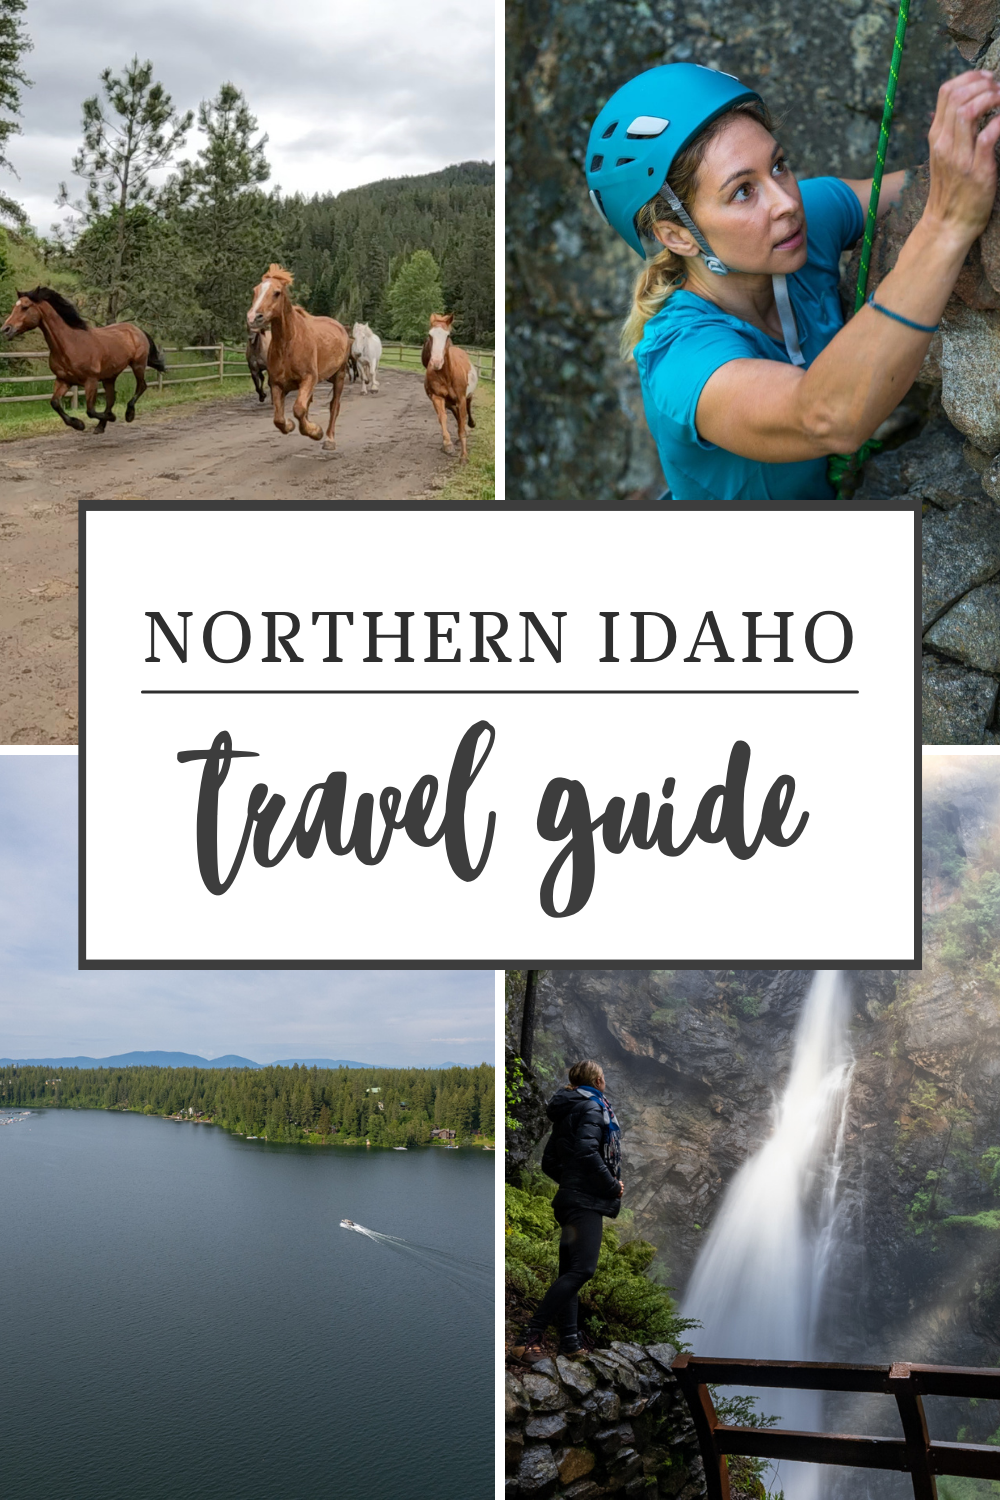 10 Things to do in northern Idaho's panhandle. From lakeside adventures, to dude ranches, biking, Atv riding and more. #idaho #northernidaho #travel 